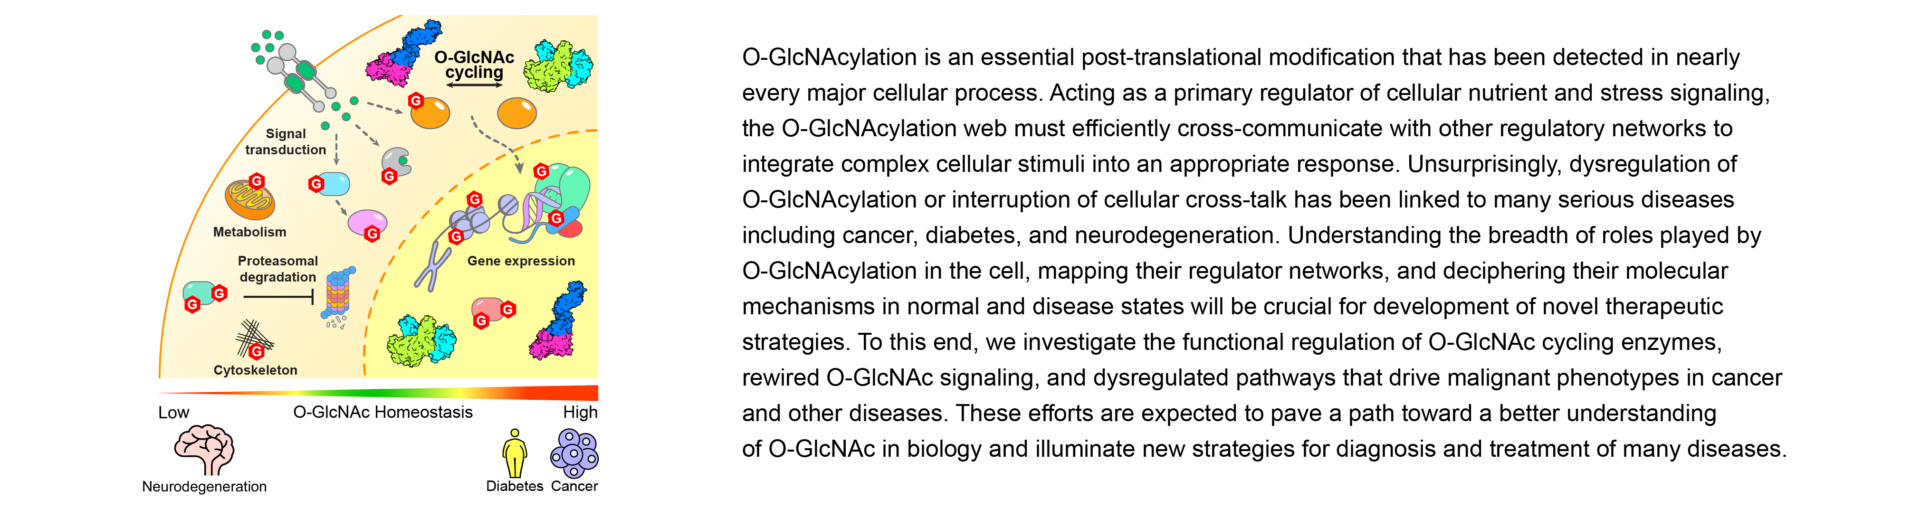 Research text on O-GlcNAc